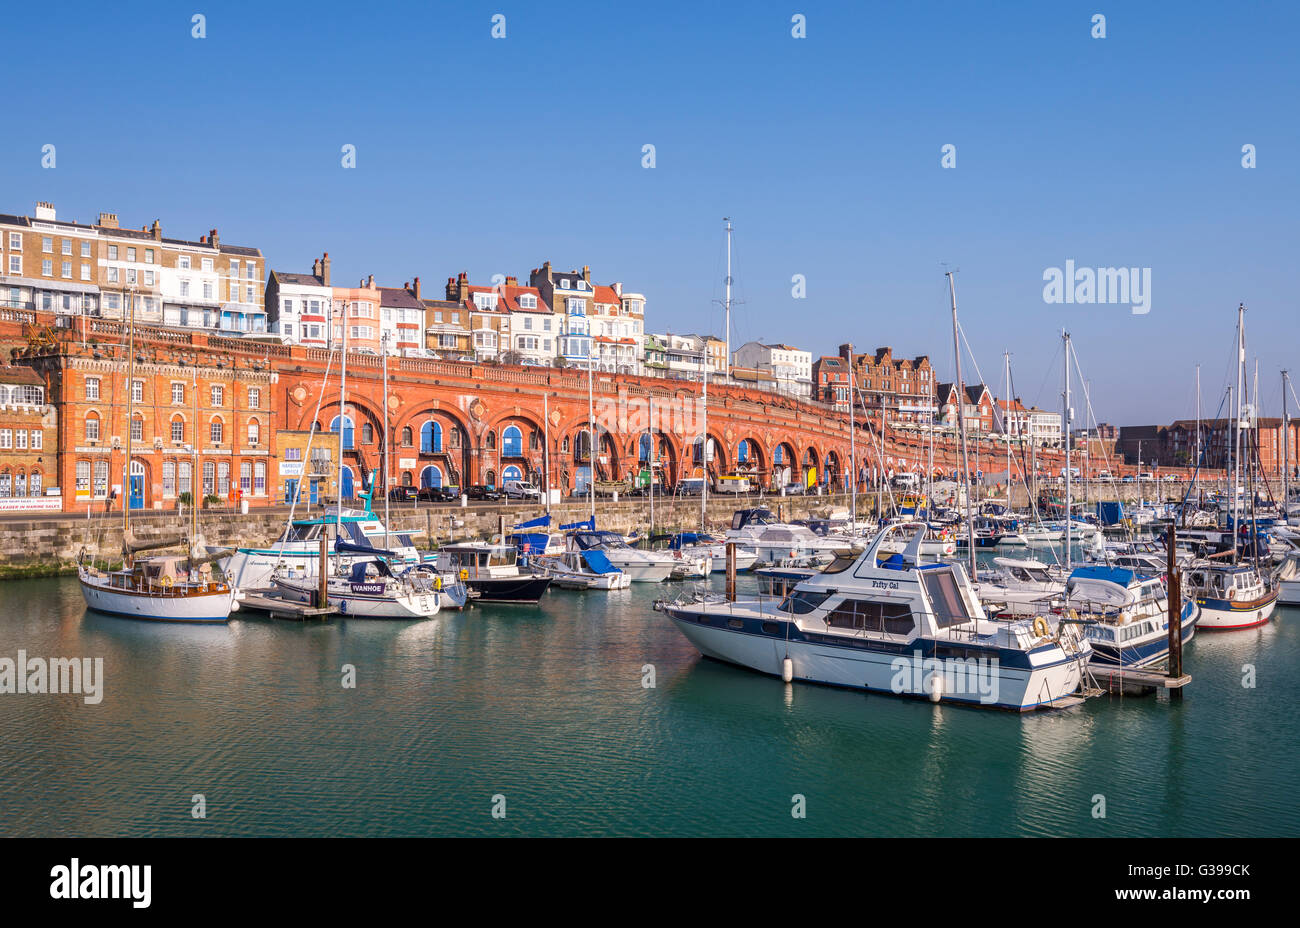 The Royal Harbour Marina Ramsgate on a sunny day. Stock Photo